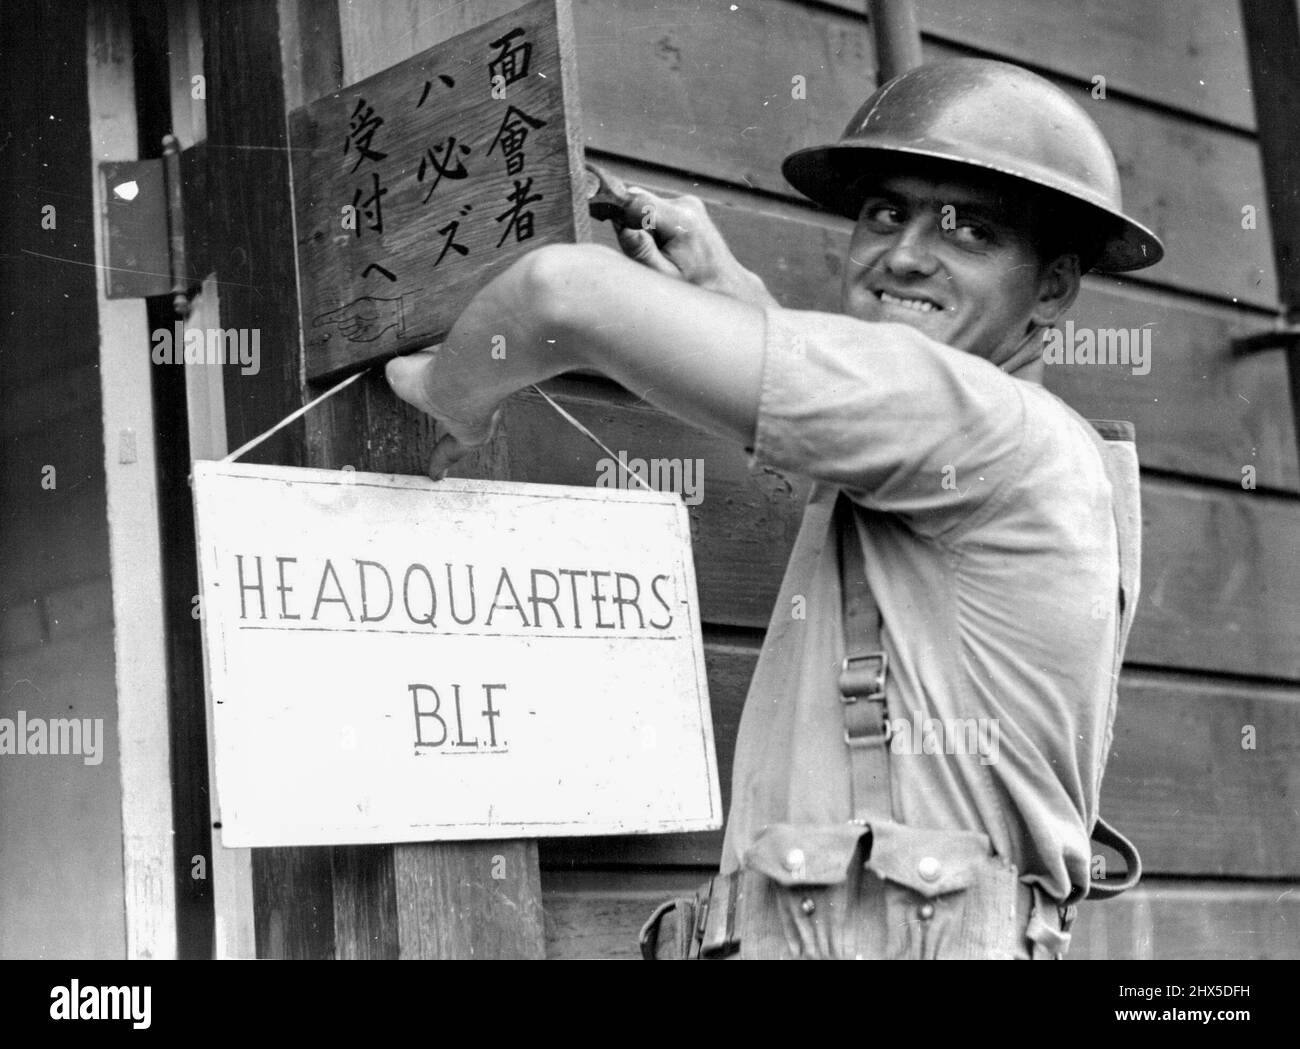 Able Seaman Steve Clough of Lakemba, N.S.W. smiles broadly as he tacks up the British Landing Force Headquarters sign on the entrance to the building requisitioned for this purpose in the Yokosuka Naval Base. September 16, 1945. (Photo by Australian Official Photo). Stock Photo